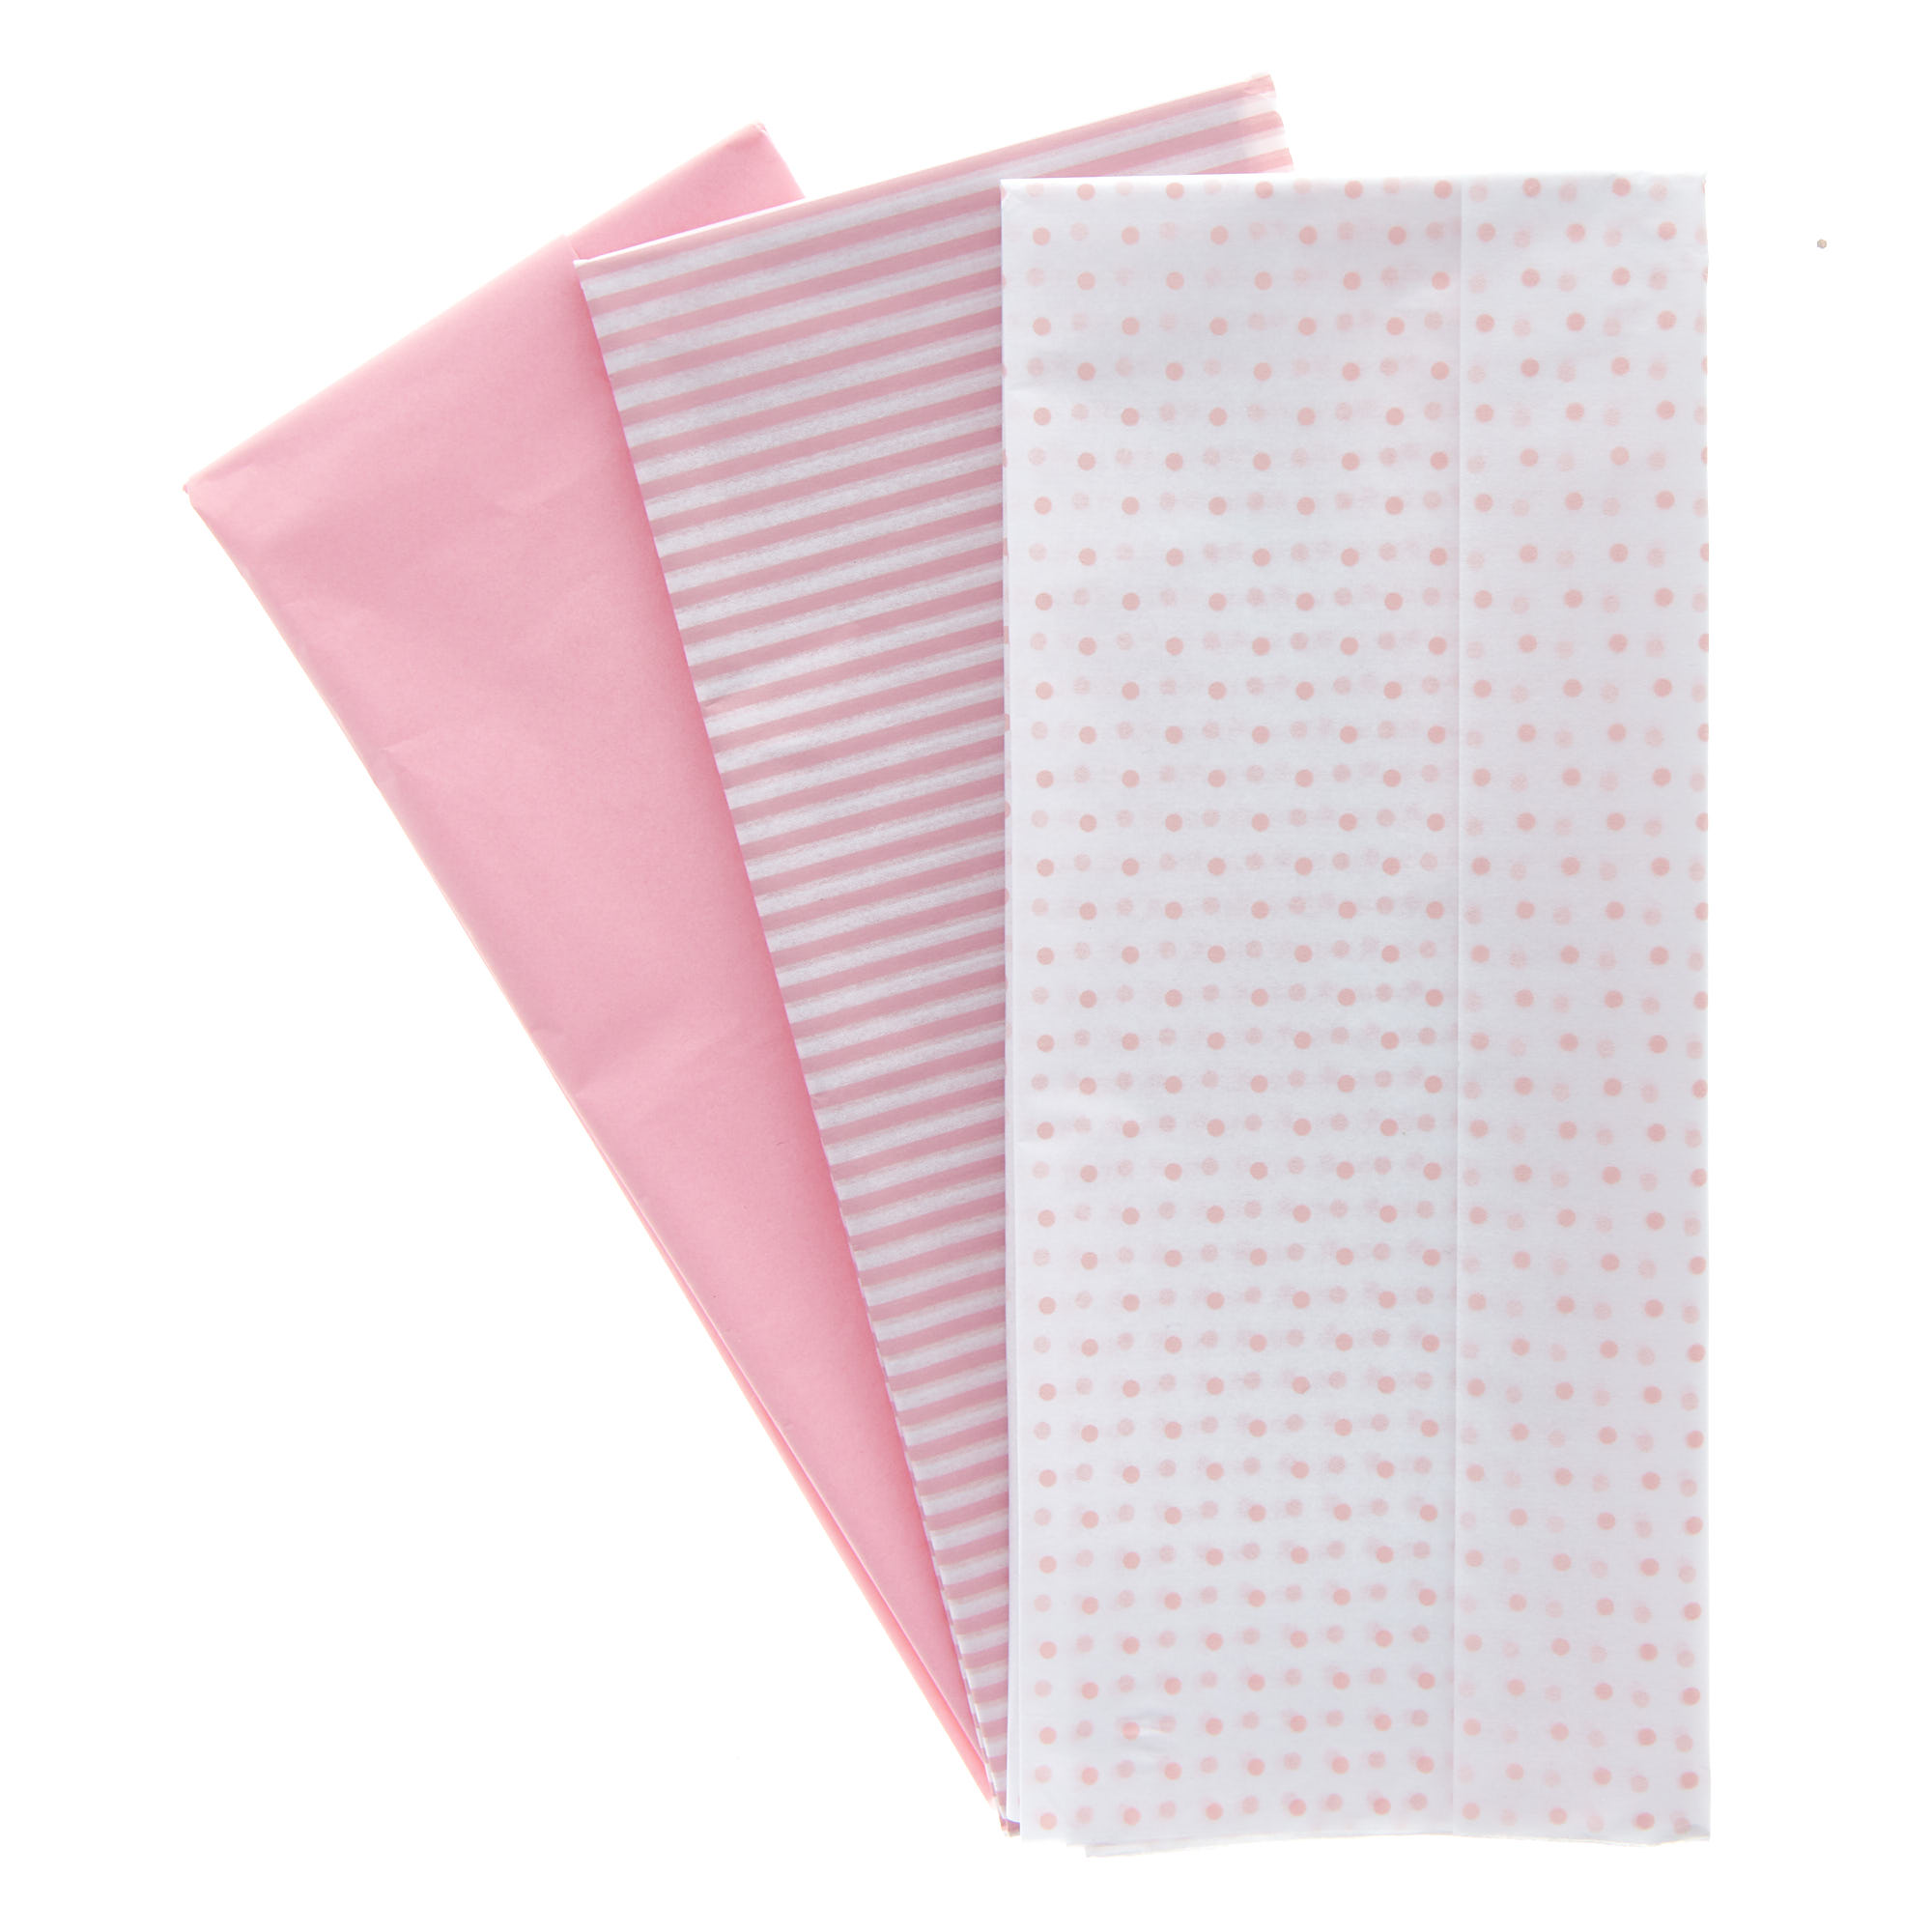 Light Pink Tissue Paper Sheets Acid Free Light Pink Gift Wrapping